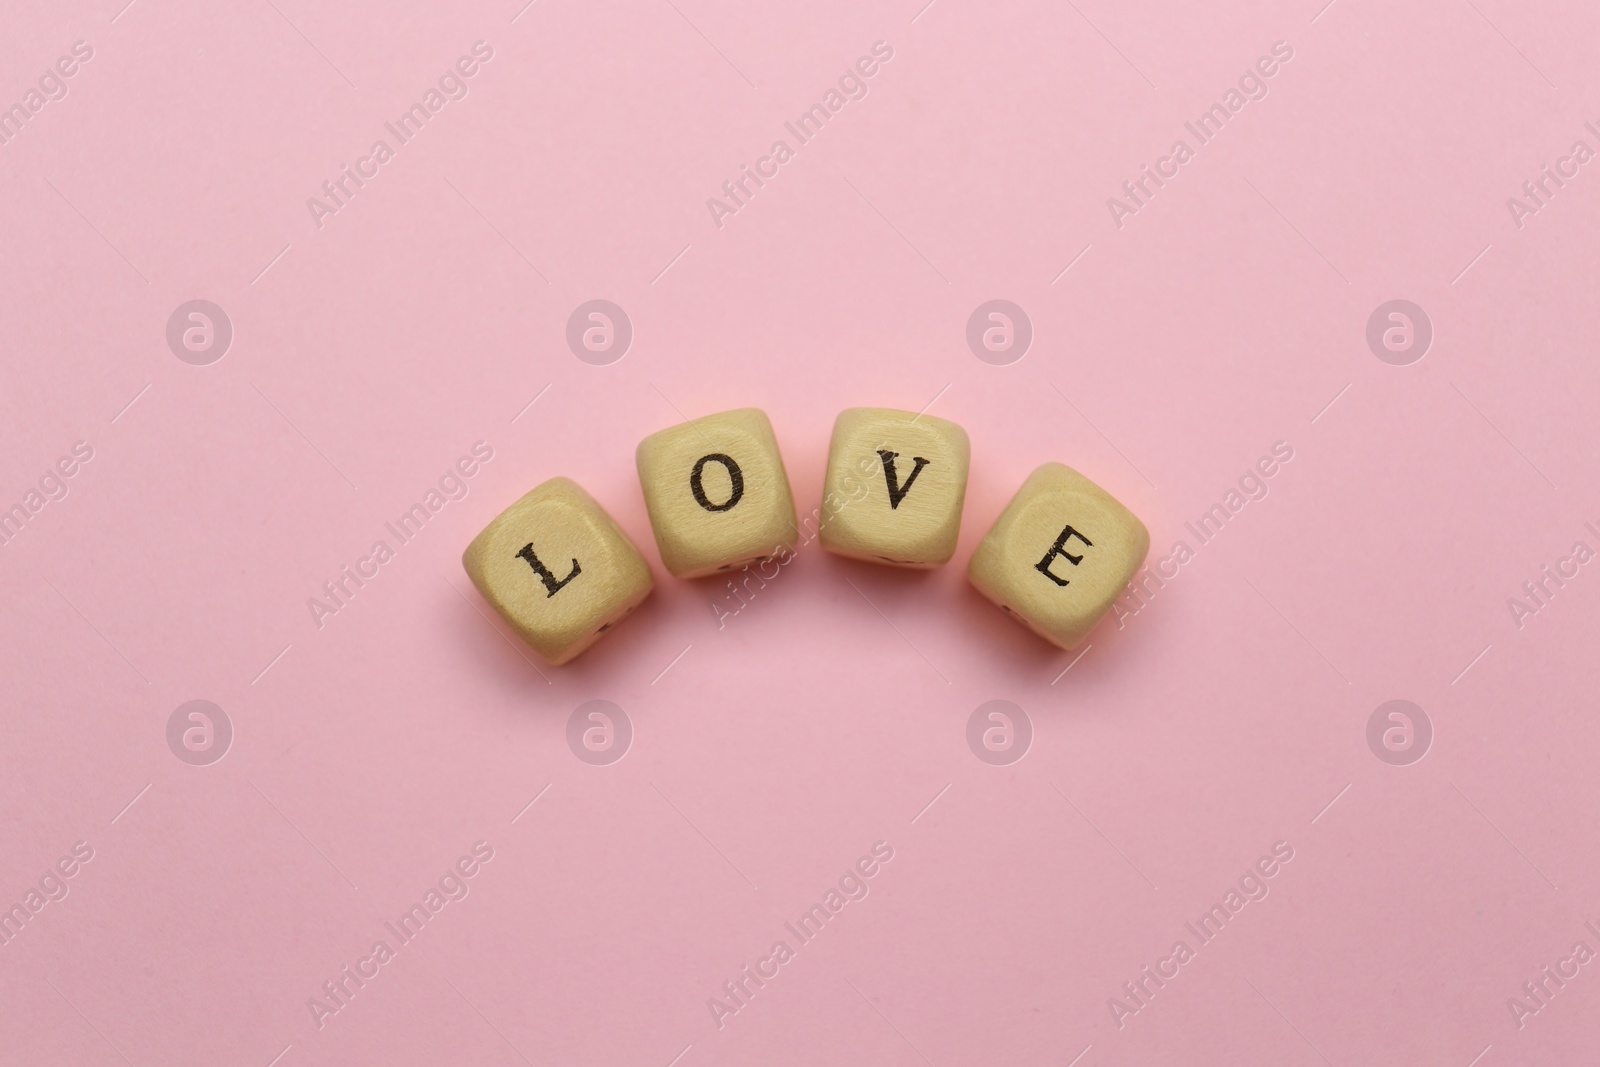 Photo of Mini cubes with letters forming word Love on pink background, flat lay